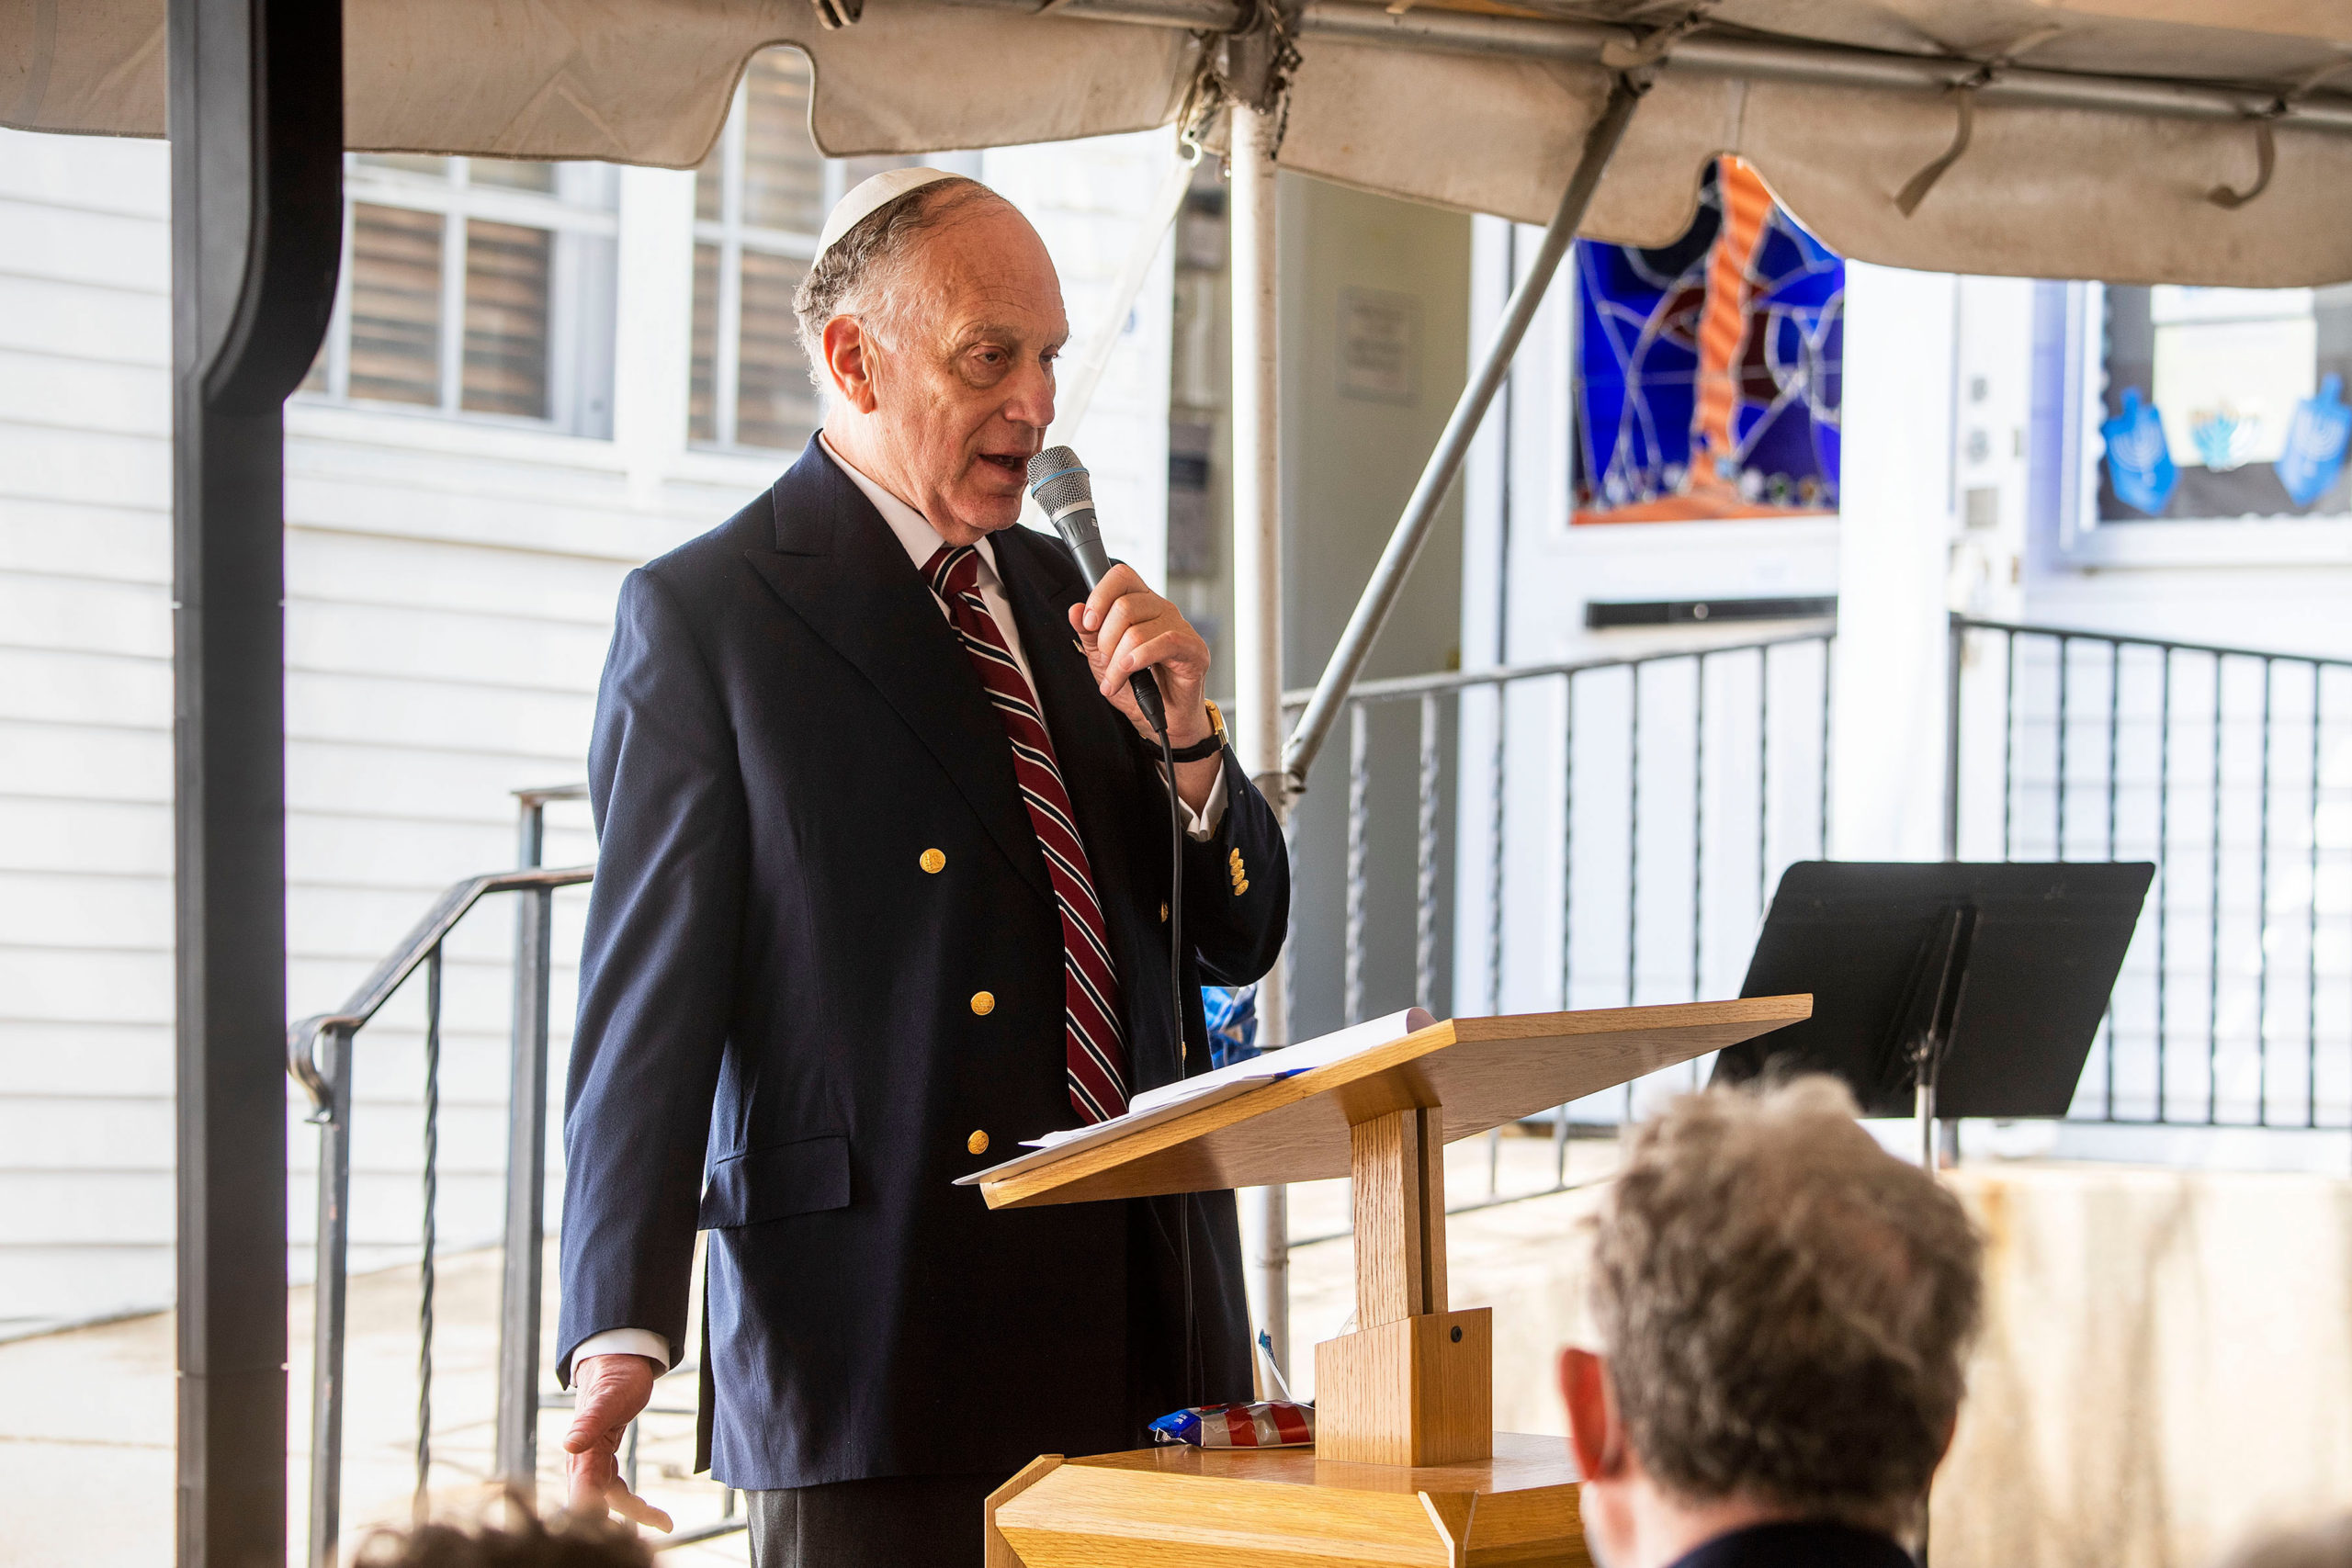 Temple Adas Israel benefactor Ronald S. Lauder makes remarks during a groundbreaking ceremony for a new addition to the temple that was held in the parking lot of the temple on Sunday morning.     MICHAEL HELLER